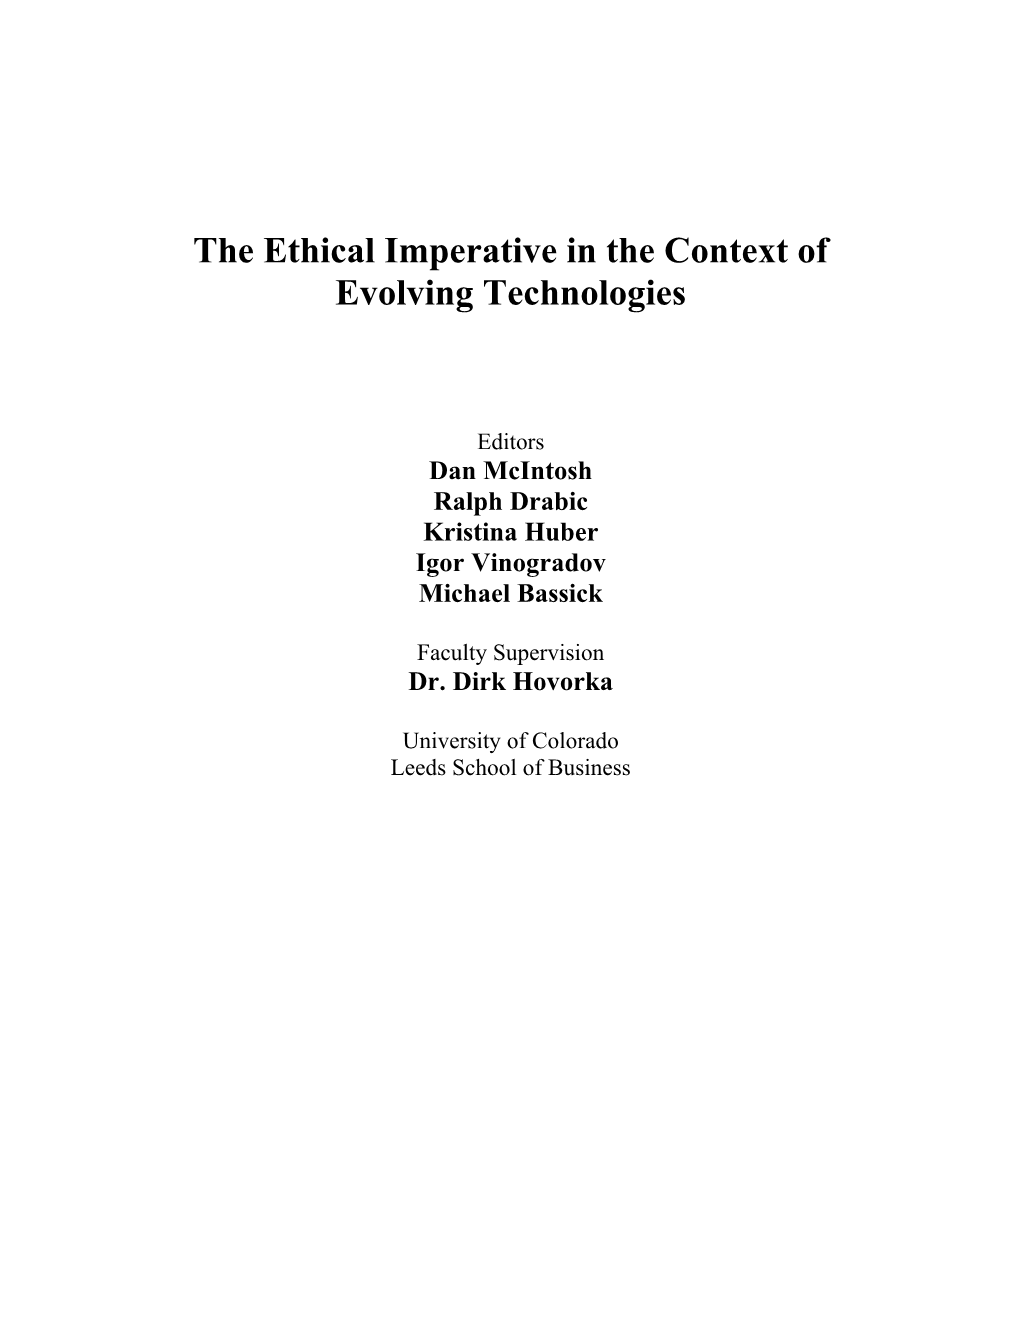 Chapter 1: Ethics of Biotechnologies